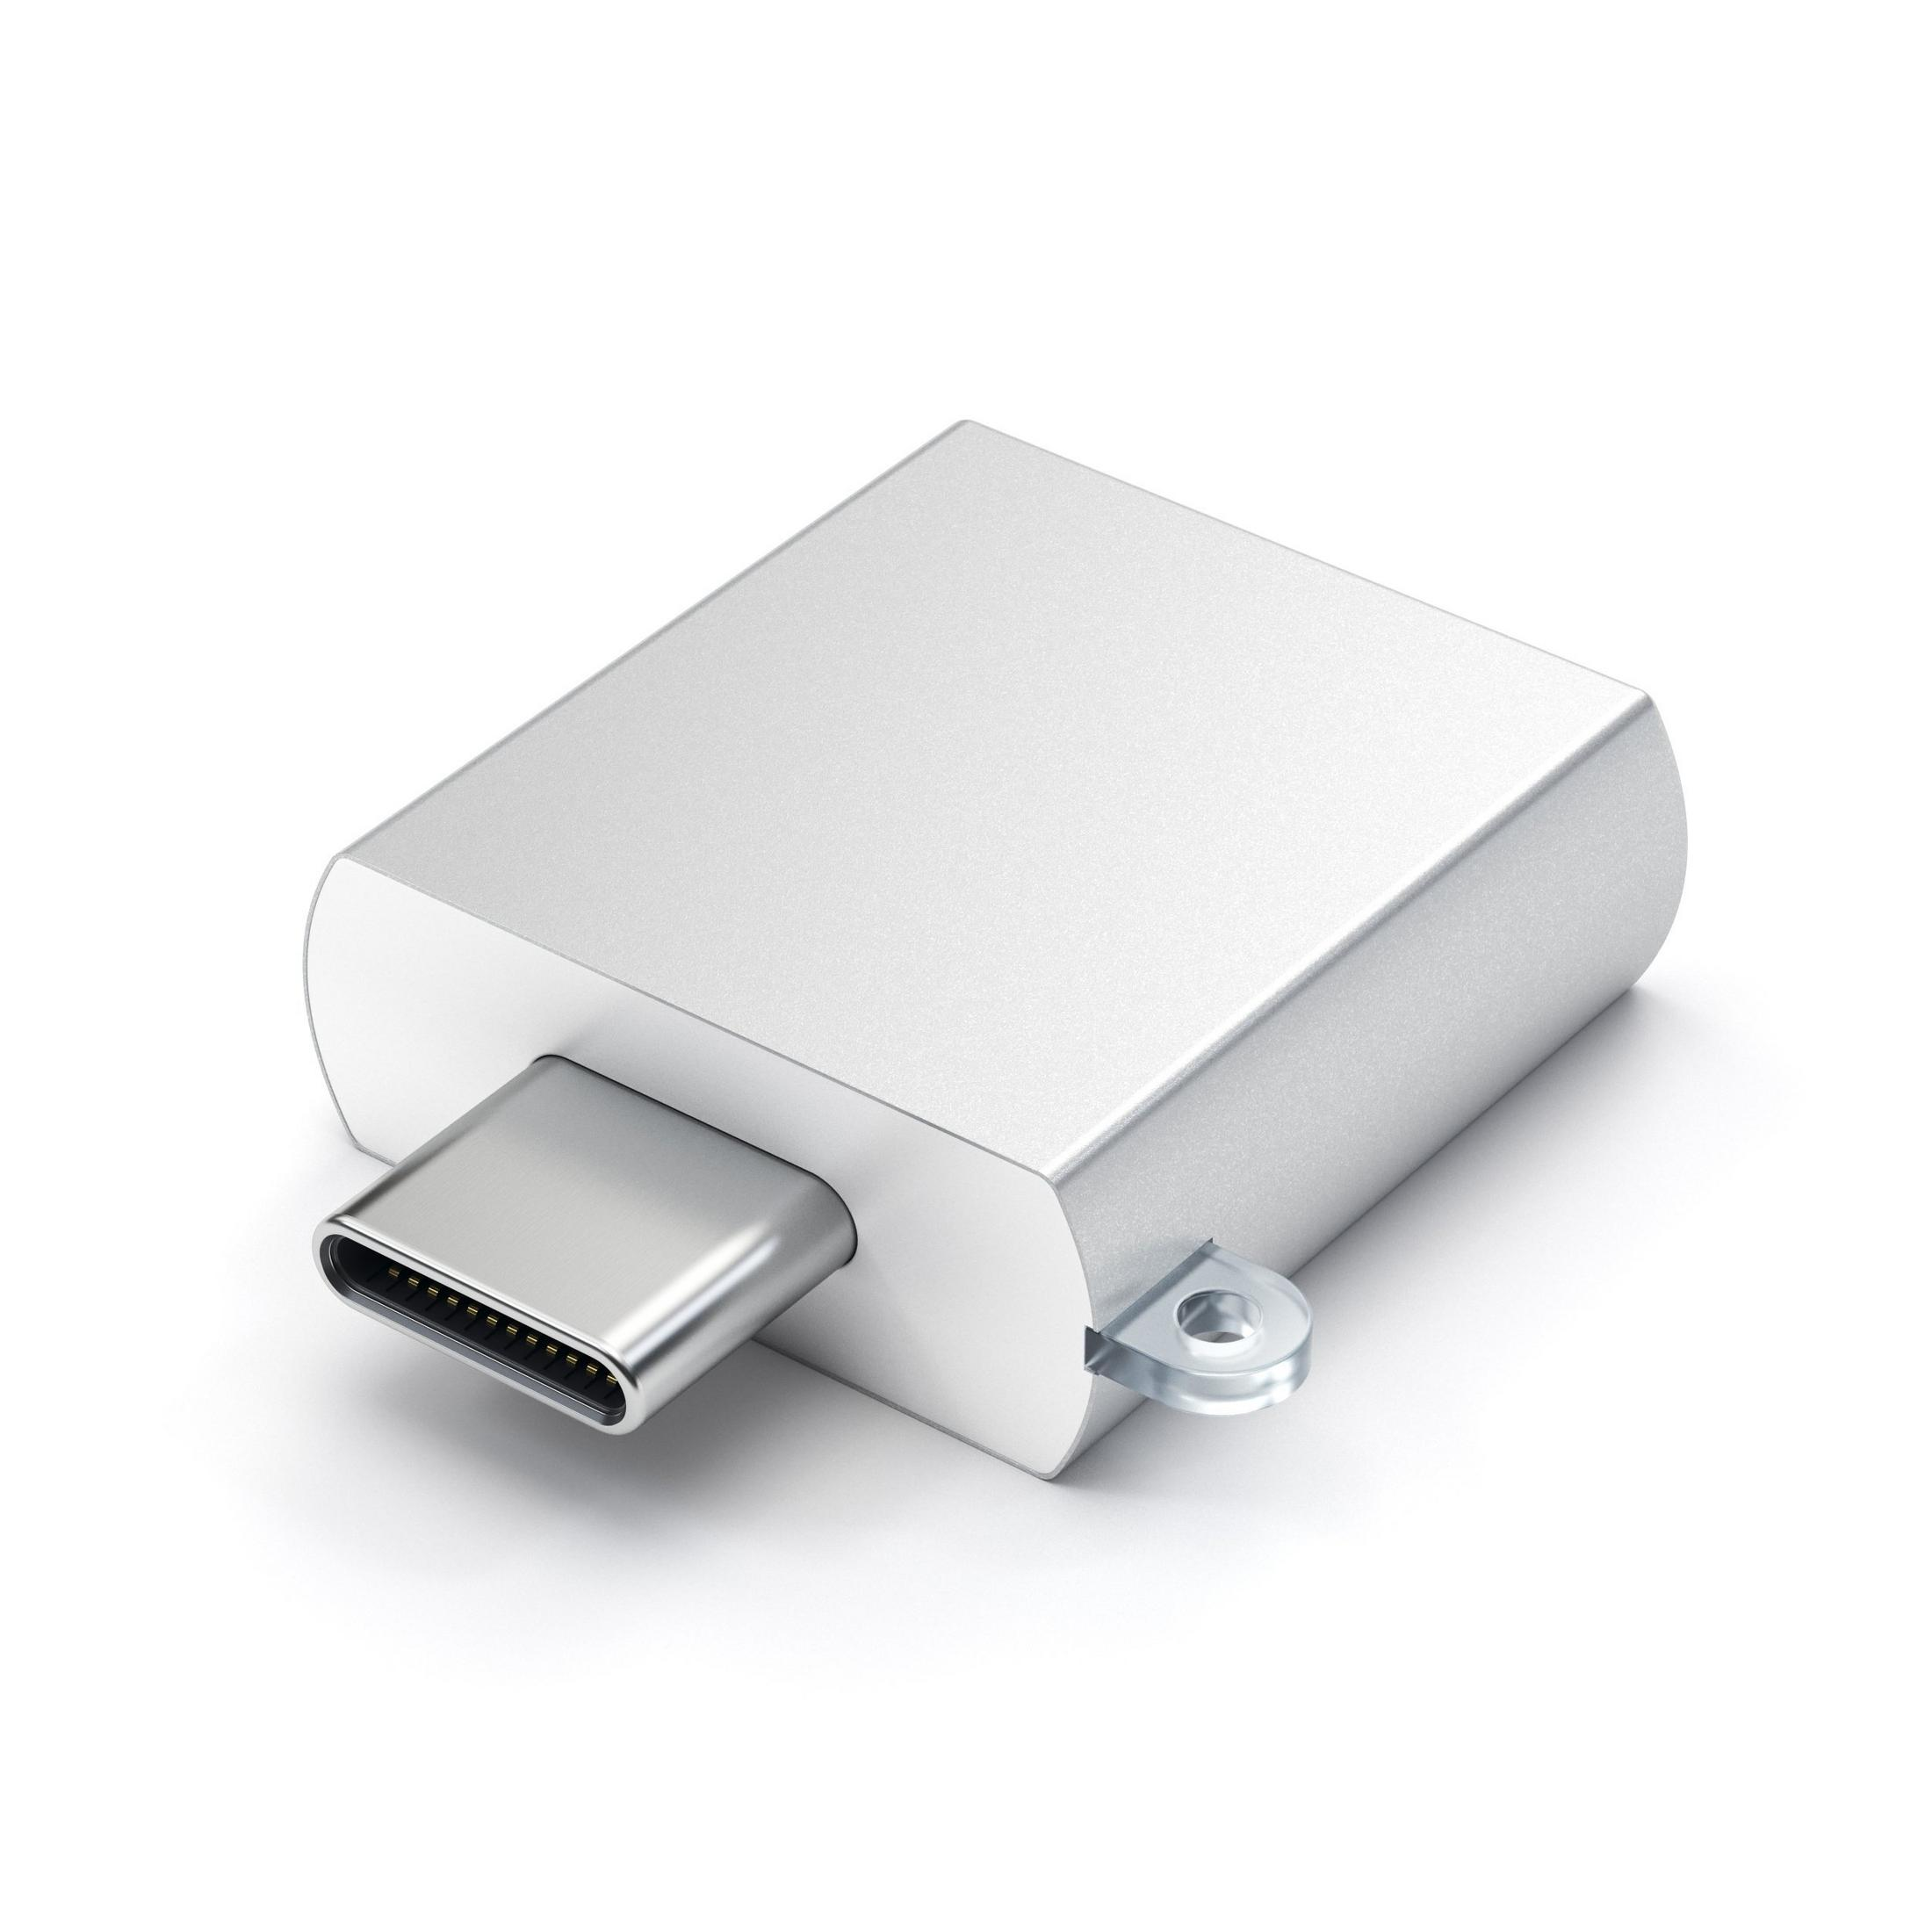 TYPE-C Silber USB ADAPTER SATECHI 179965 Adapter, SILBER